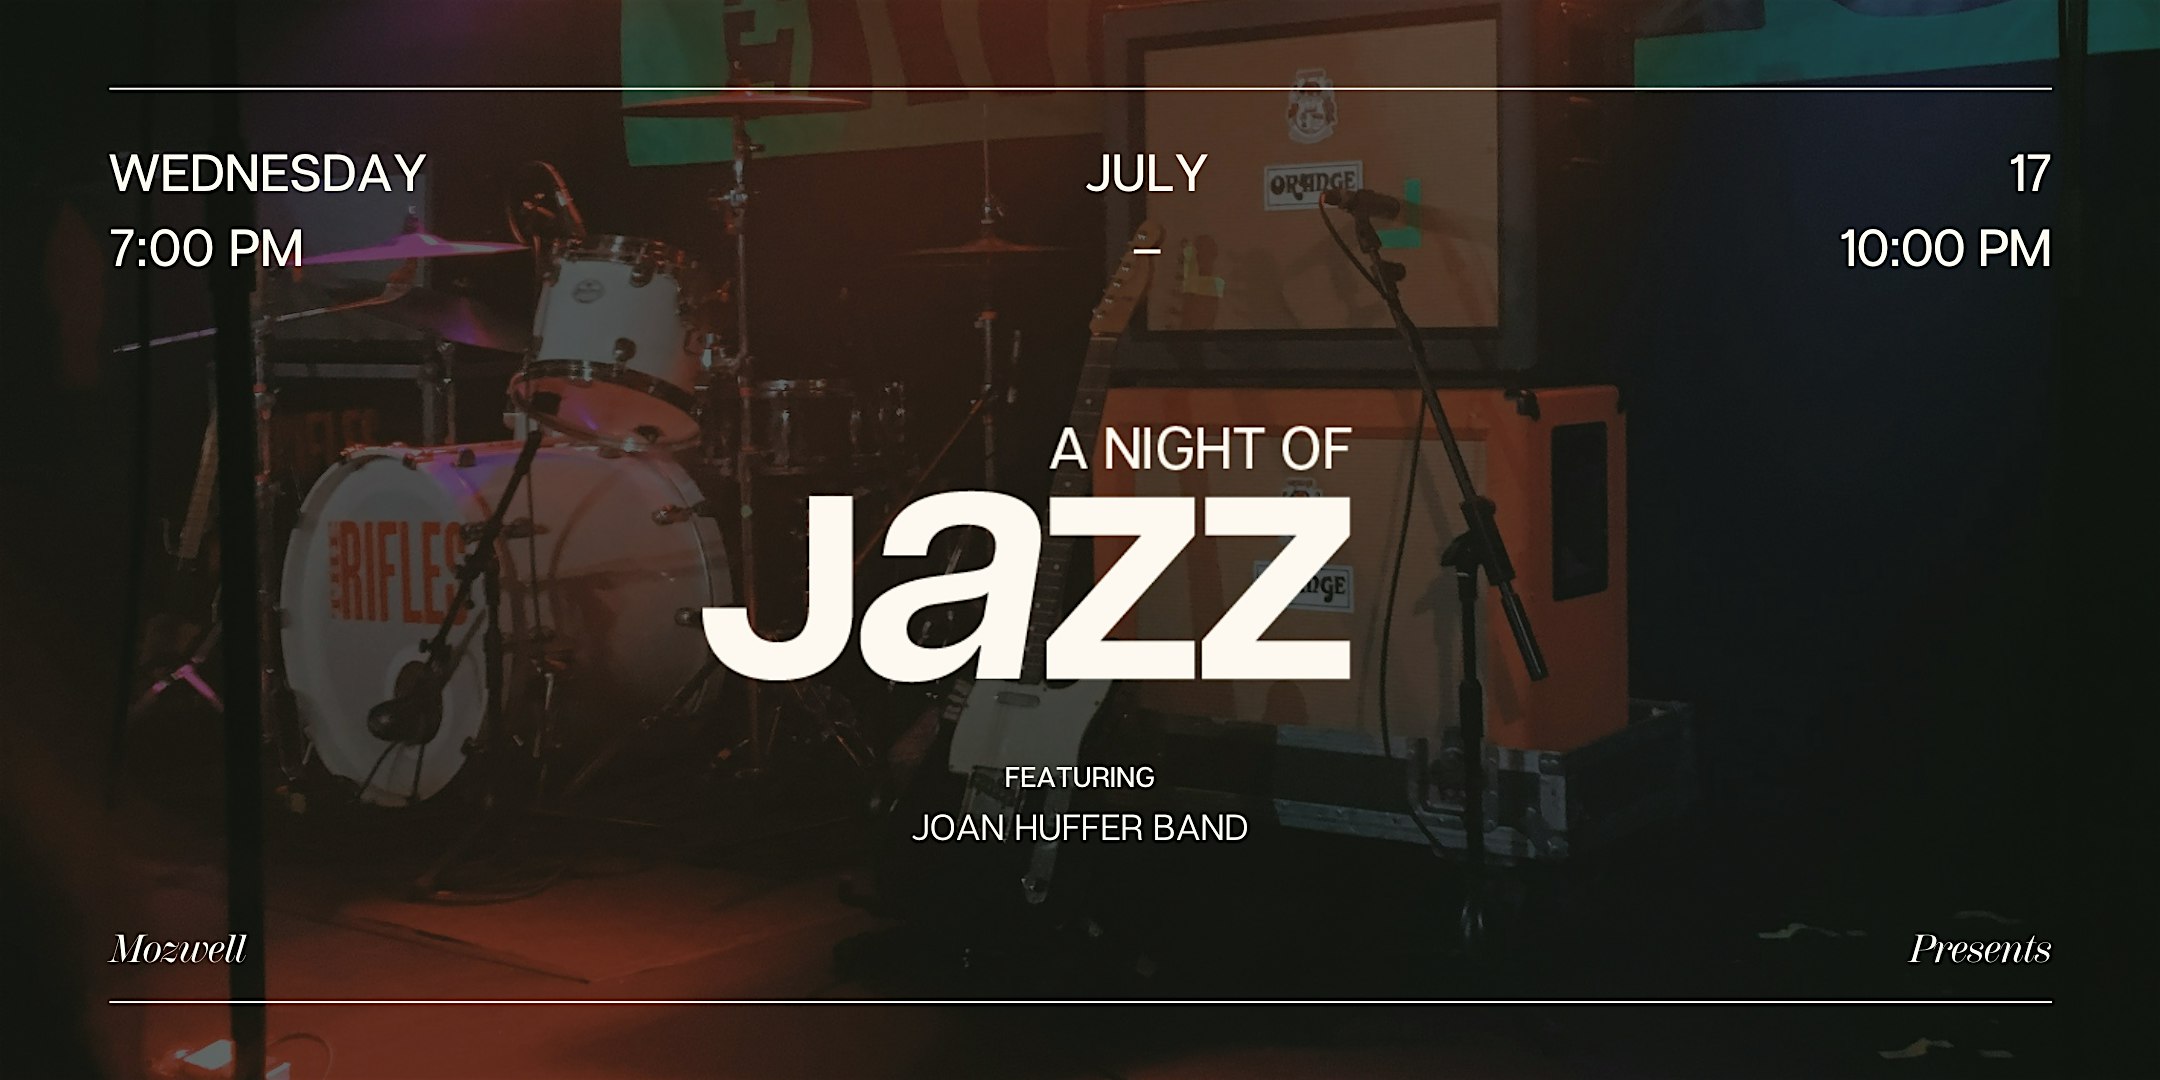 A Night of Jazz at Mozwell Featuring Joan Huffer